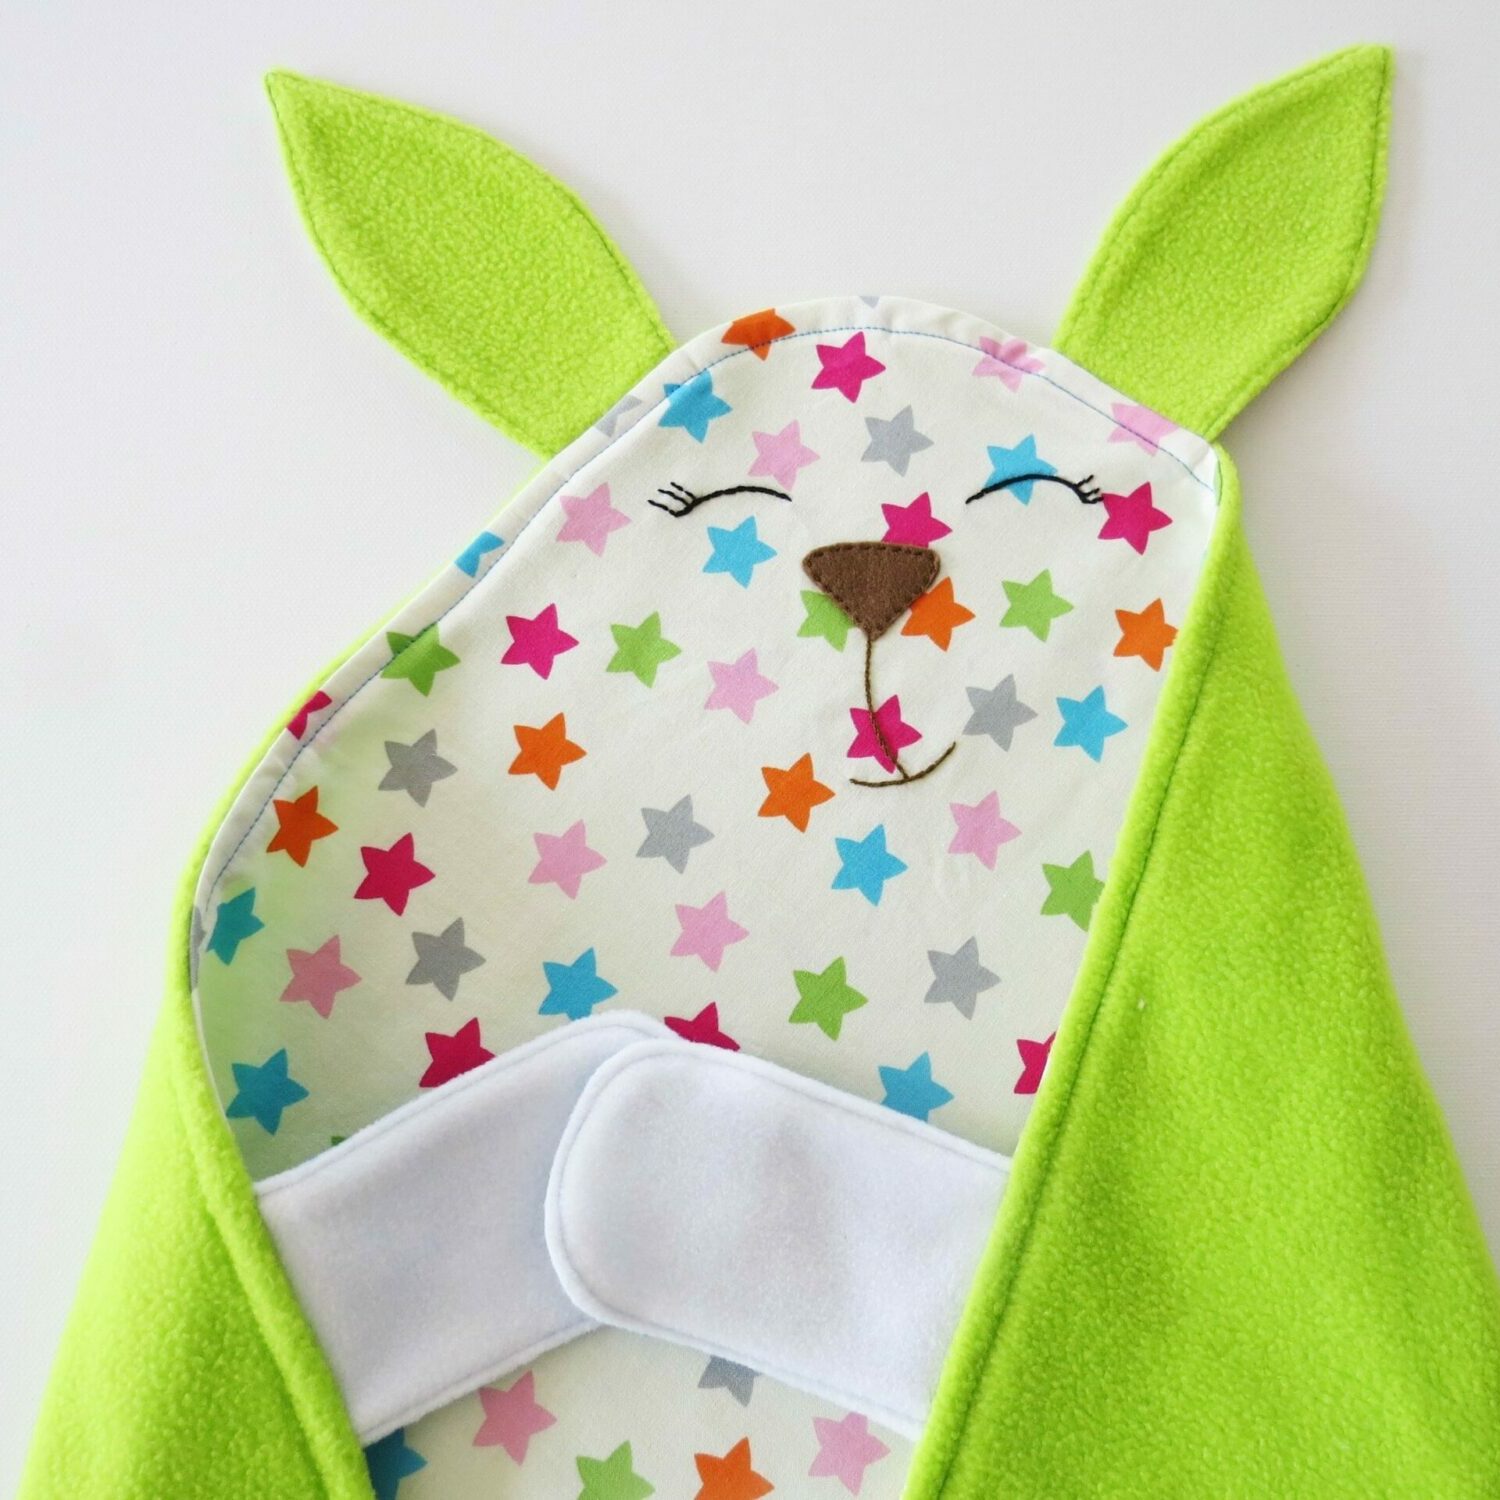 Bunny baby Blanket_easy sewing project for beginners for baby boy or baby girl_ baby shower gift